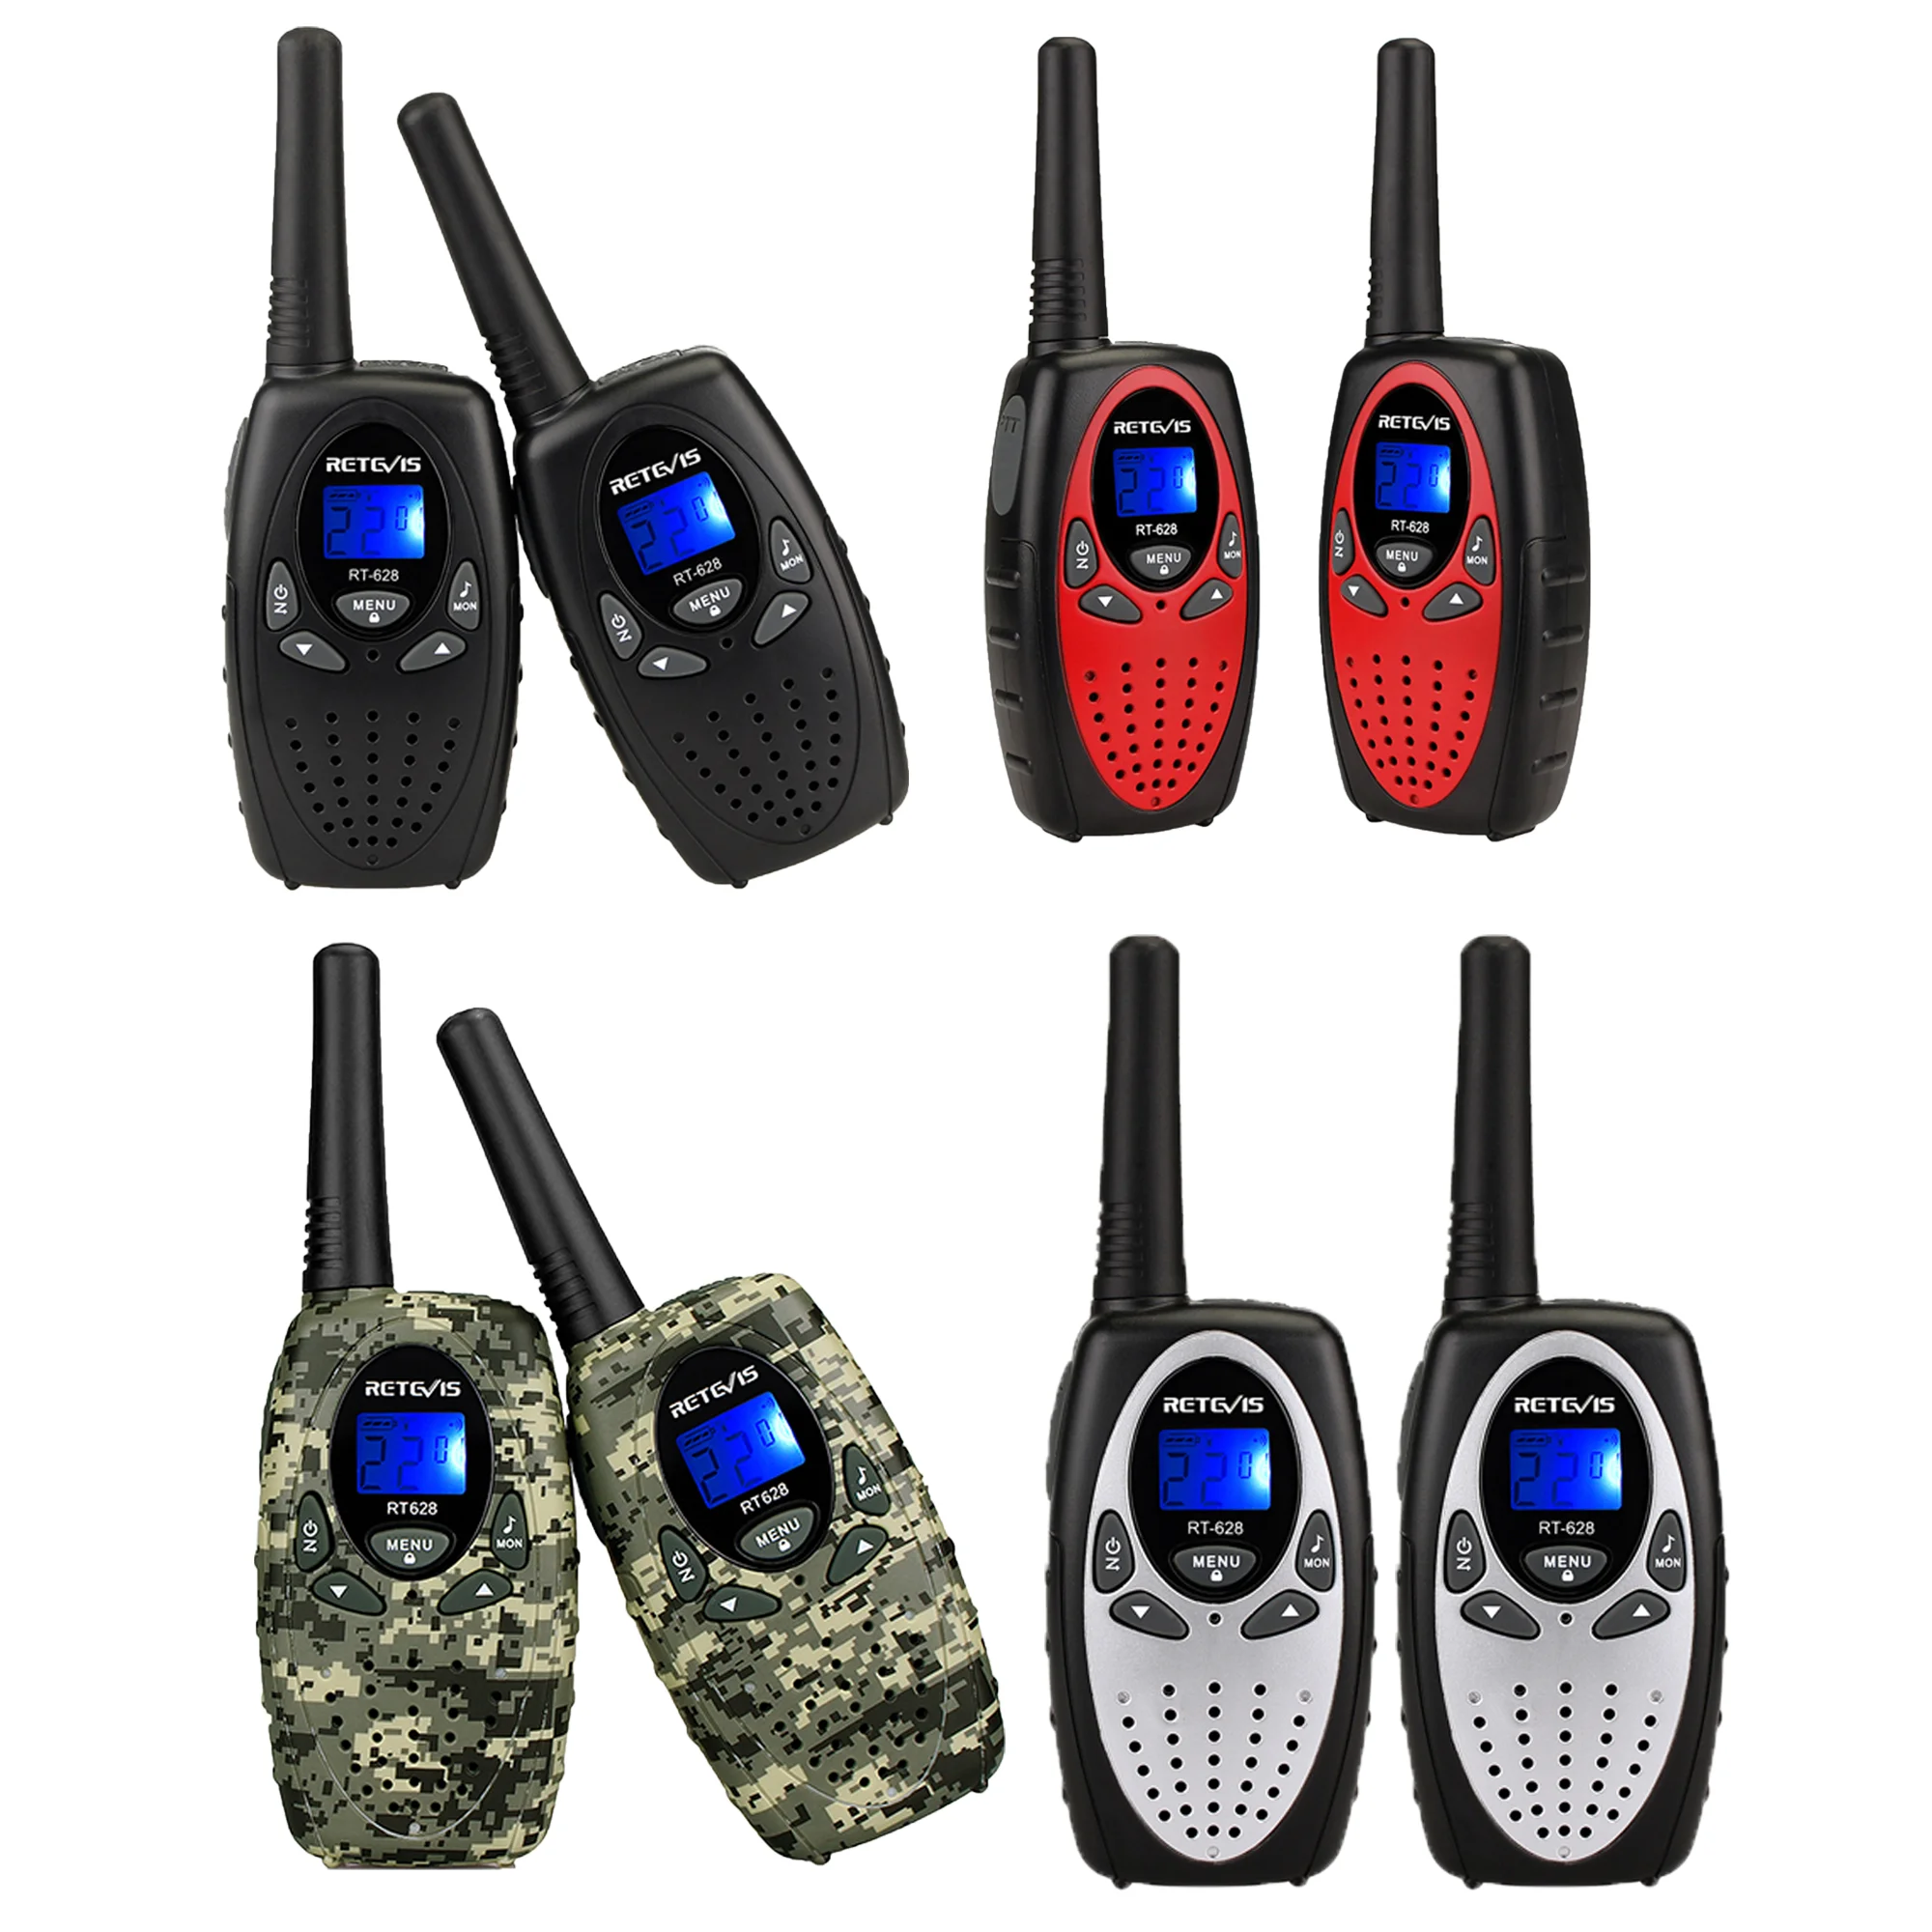 

Retevis RT628 Kids Toys Walkie Talkies 8Channel PMR446 UHF446.00625-446.09375MHz two Way Radio For Children's Xmas gift (1Pair)